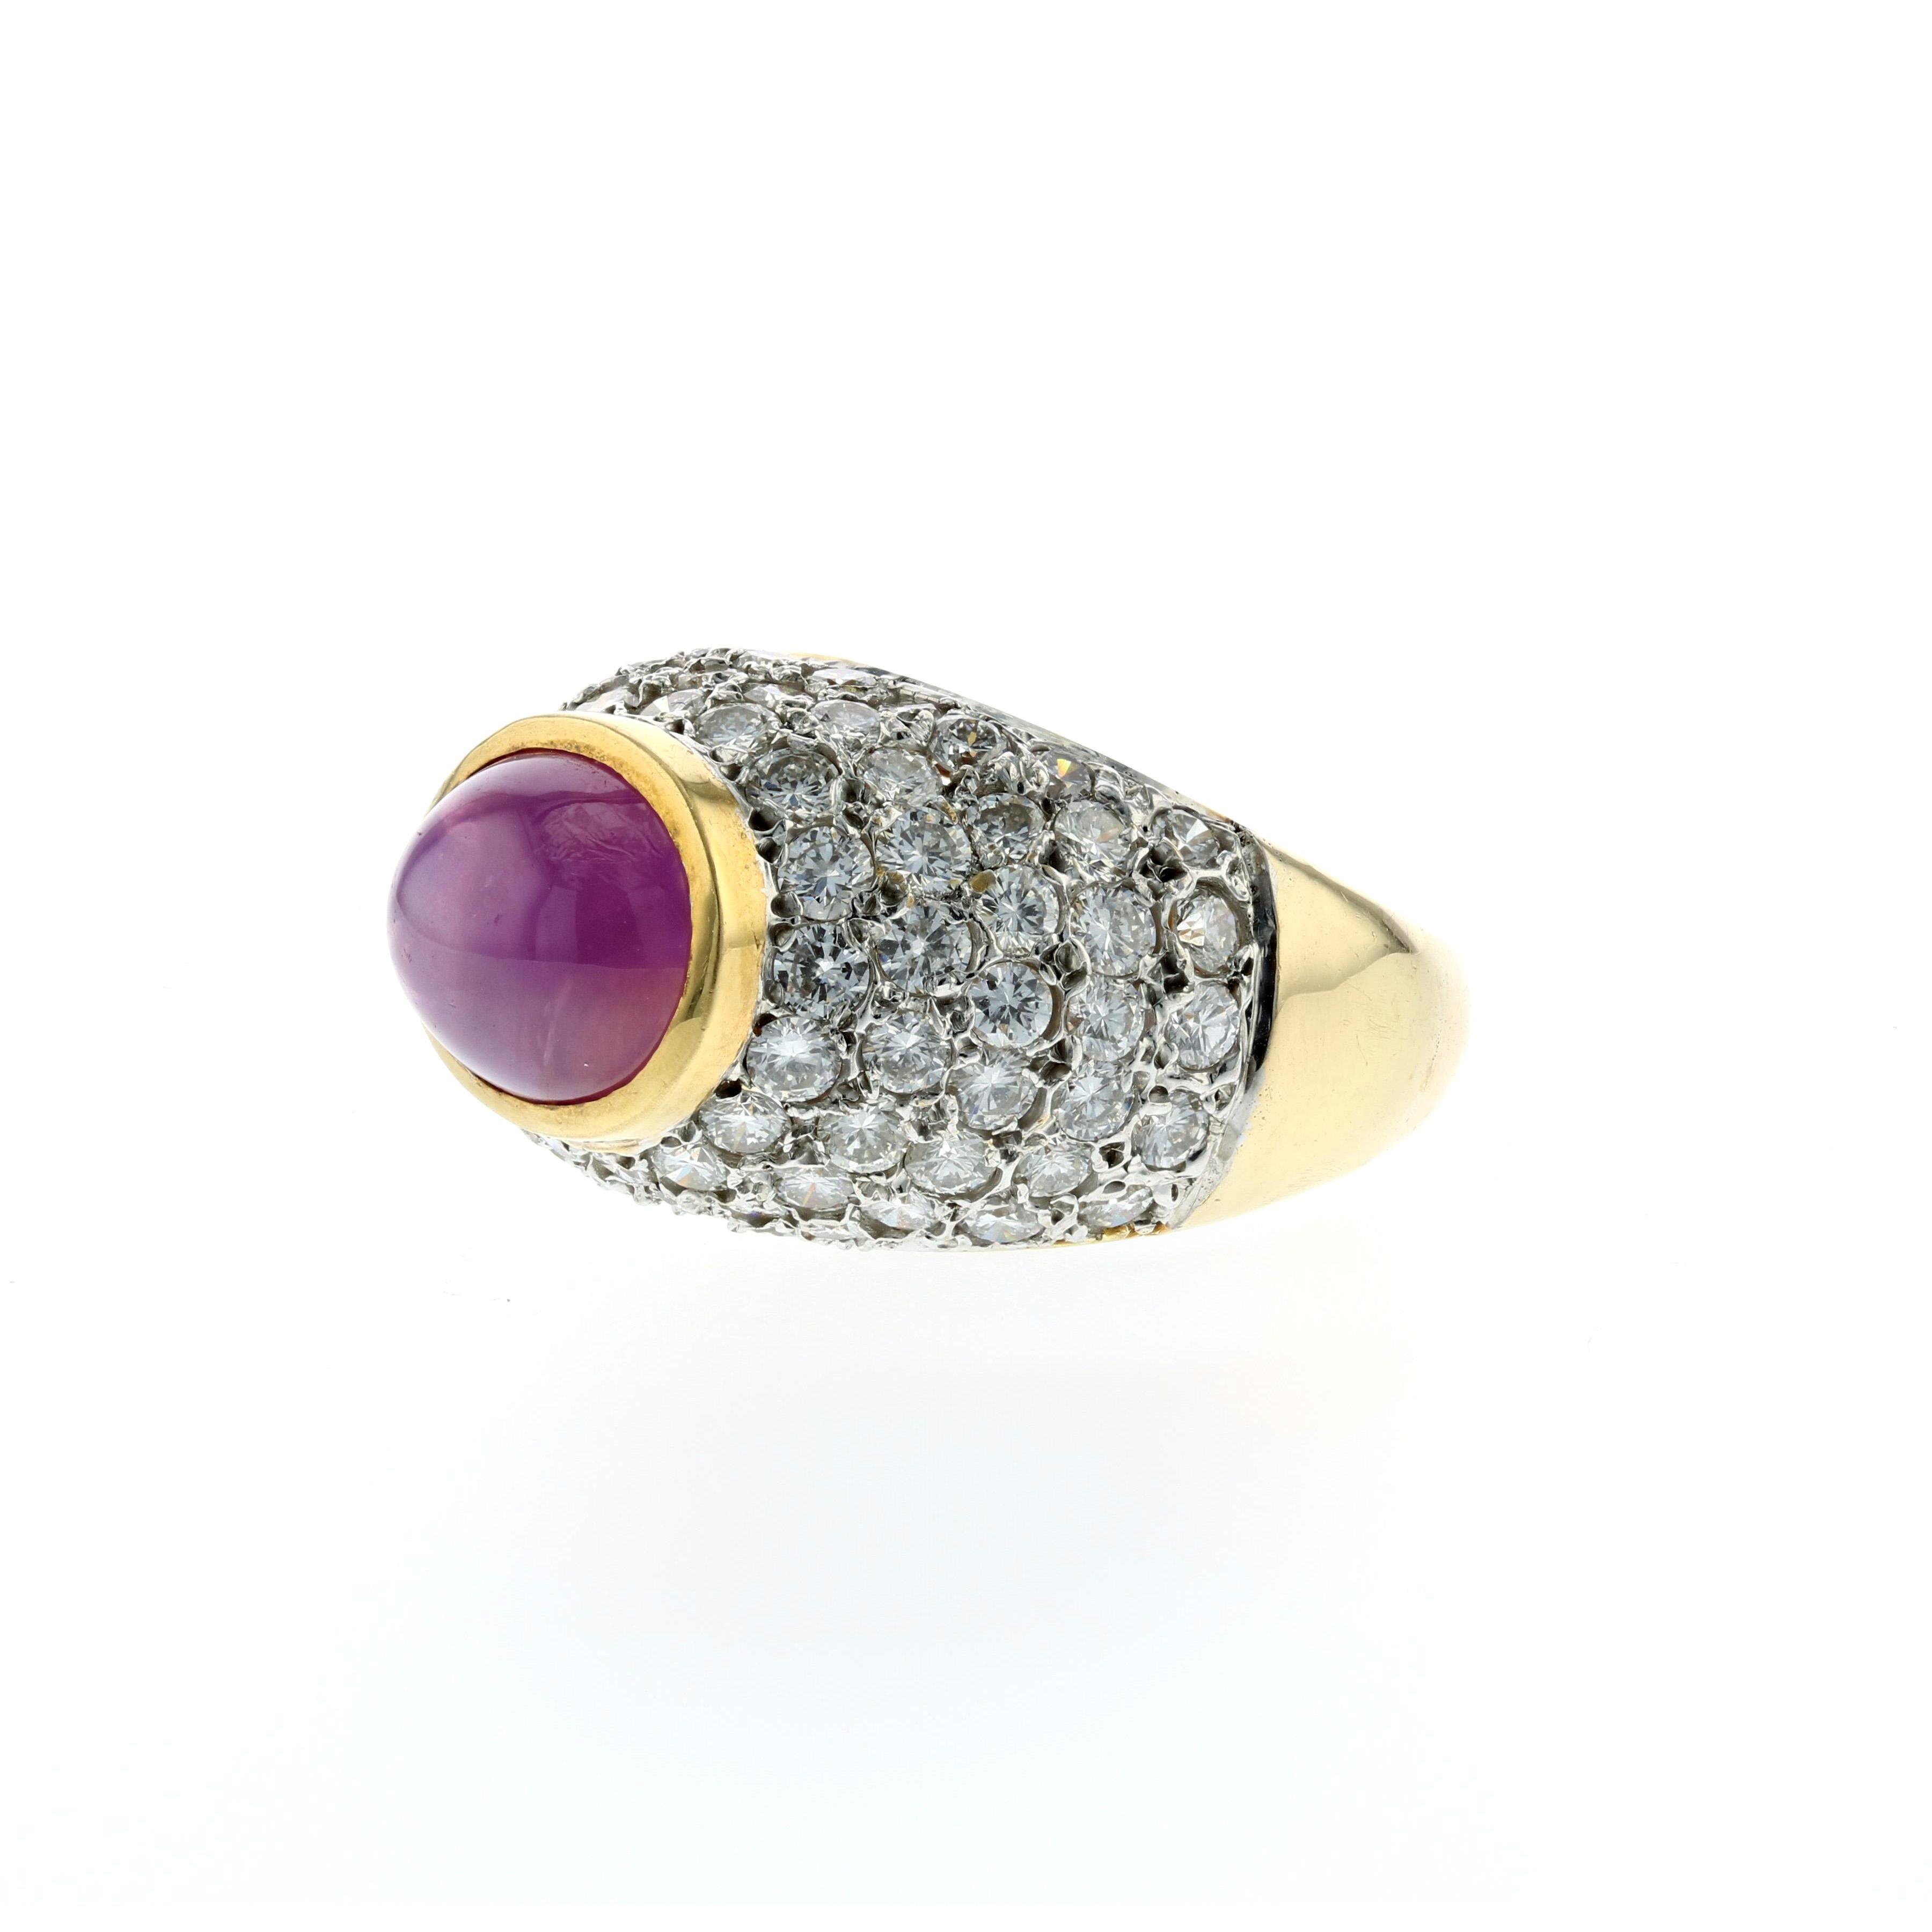 18K yellow gold bombé style ring featuring a pink star sapphire accented by pavé round diamonds.  The star sapphire totals 6.50 carats, accompanied by a GIA report; natural color, no treatment.  Additionally, there are 80 round brilliant-cut